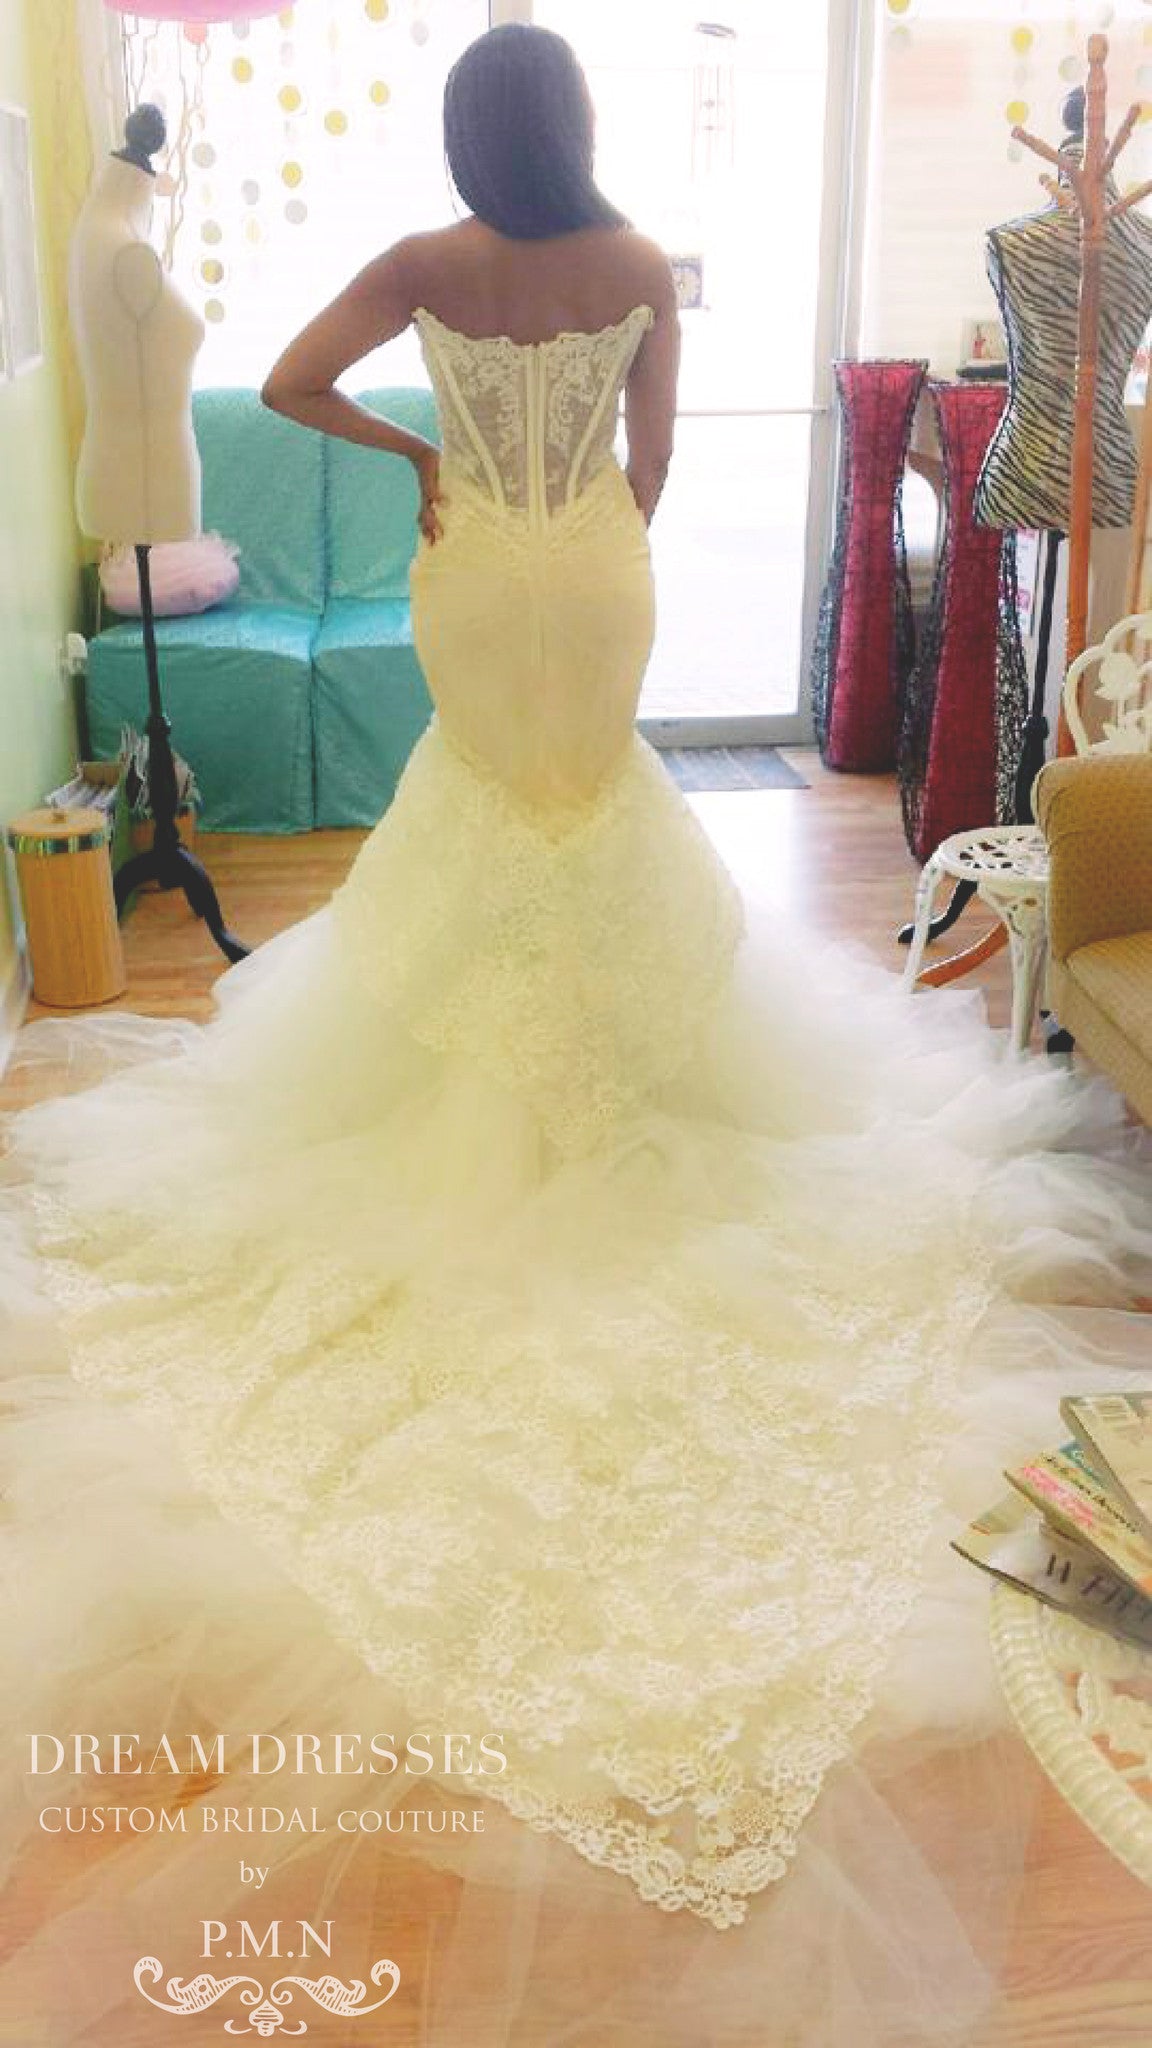 Lace Trumpet Wedding Dress With Teired Train (# Chisa)